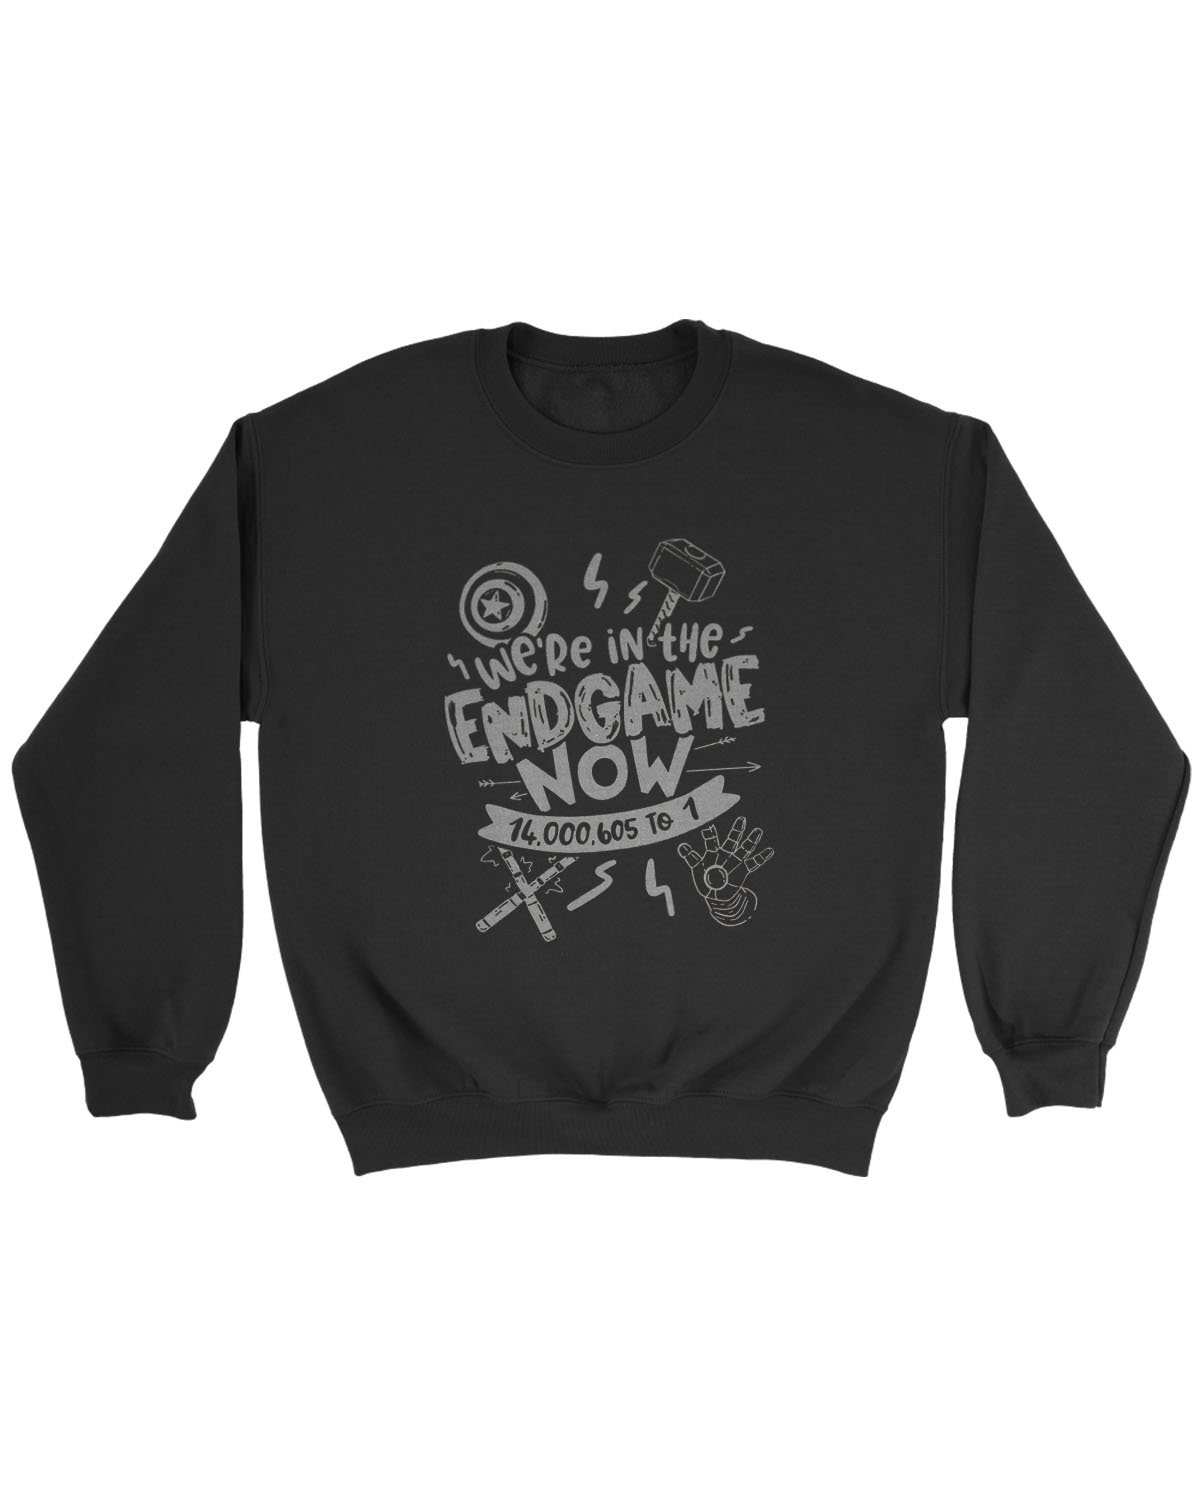 We Are In The Endgame Now Sweatshirt